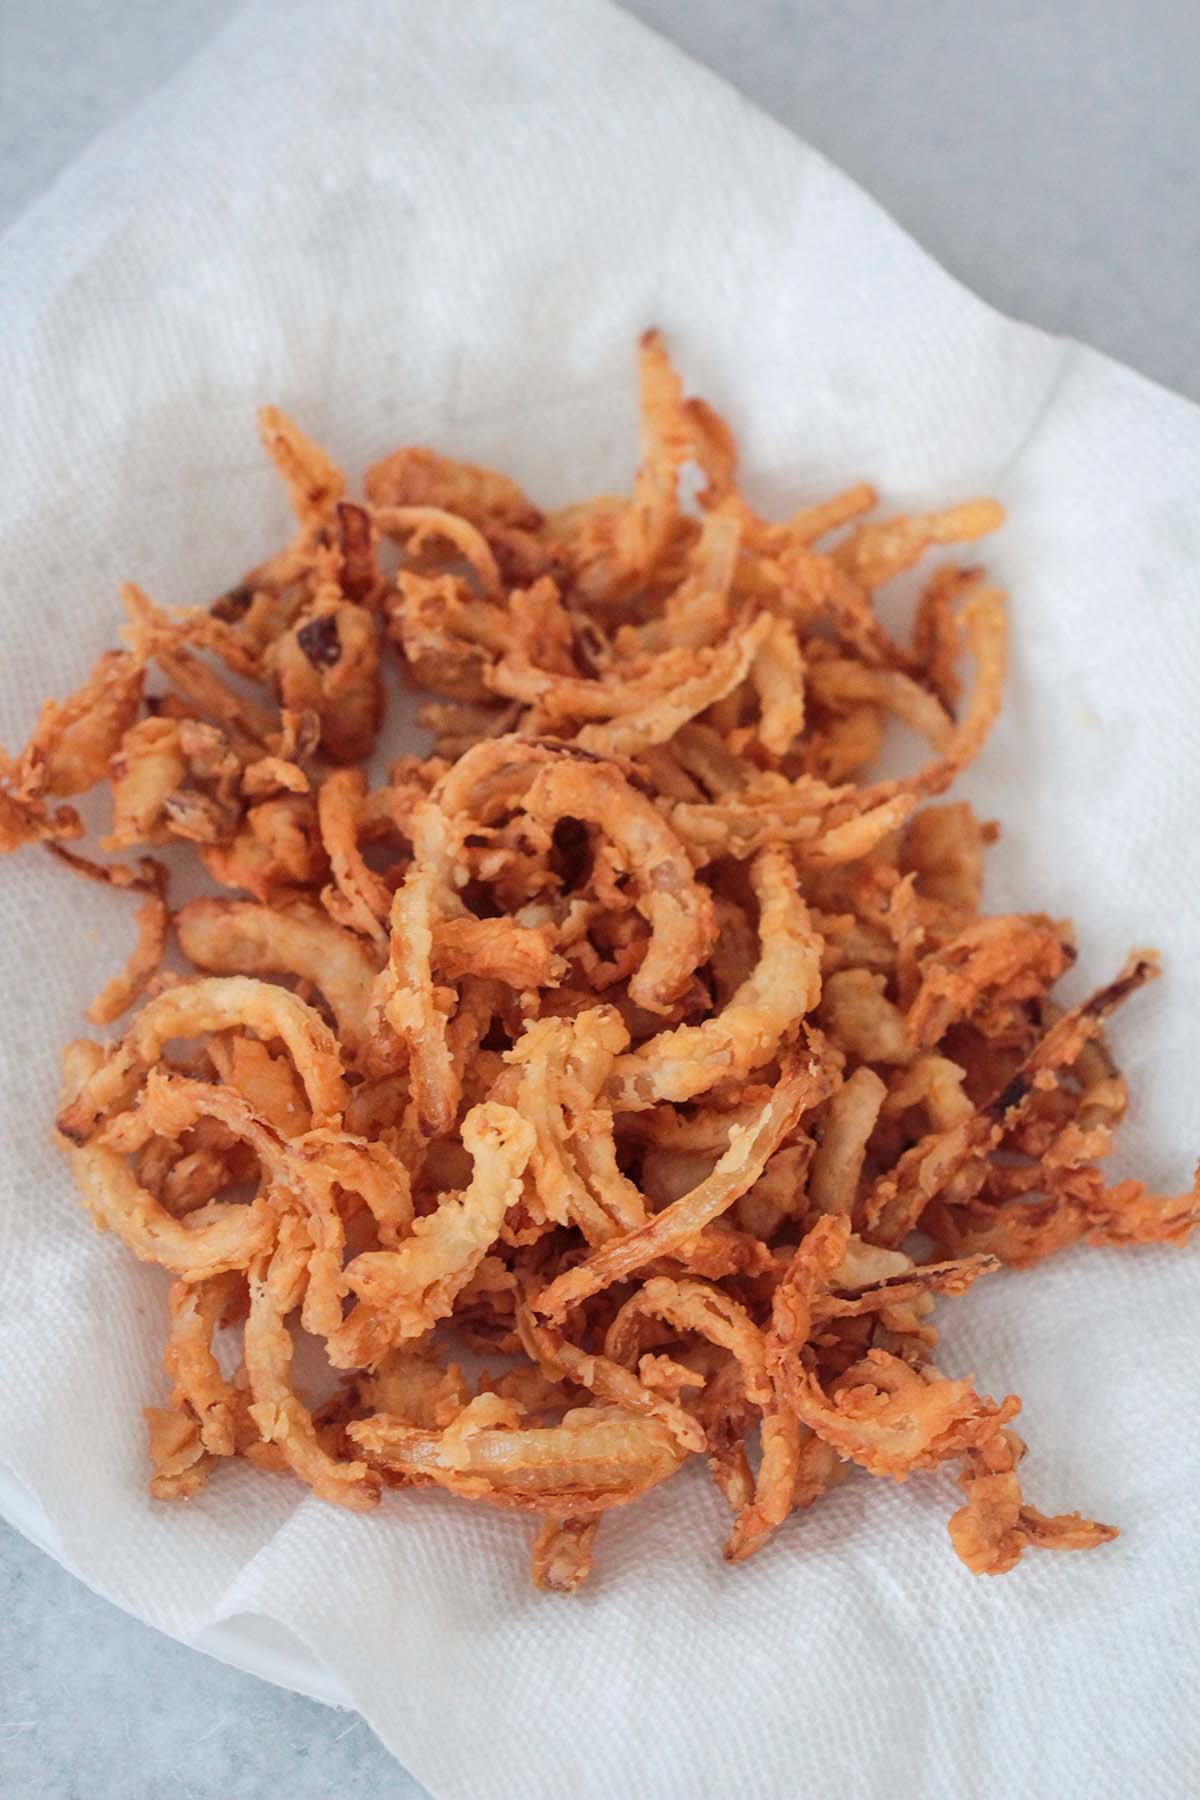 https://www.cookedbyjulie.com/wp-content/uploads/2022/02/French-fried-onions-four.jpg